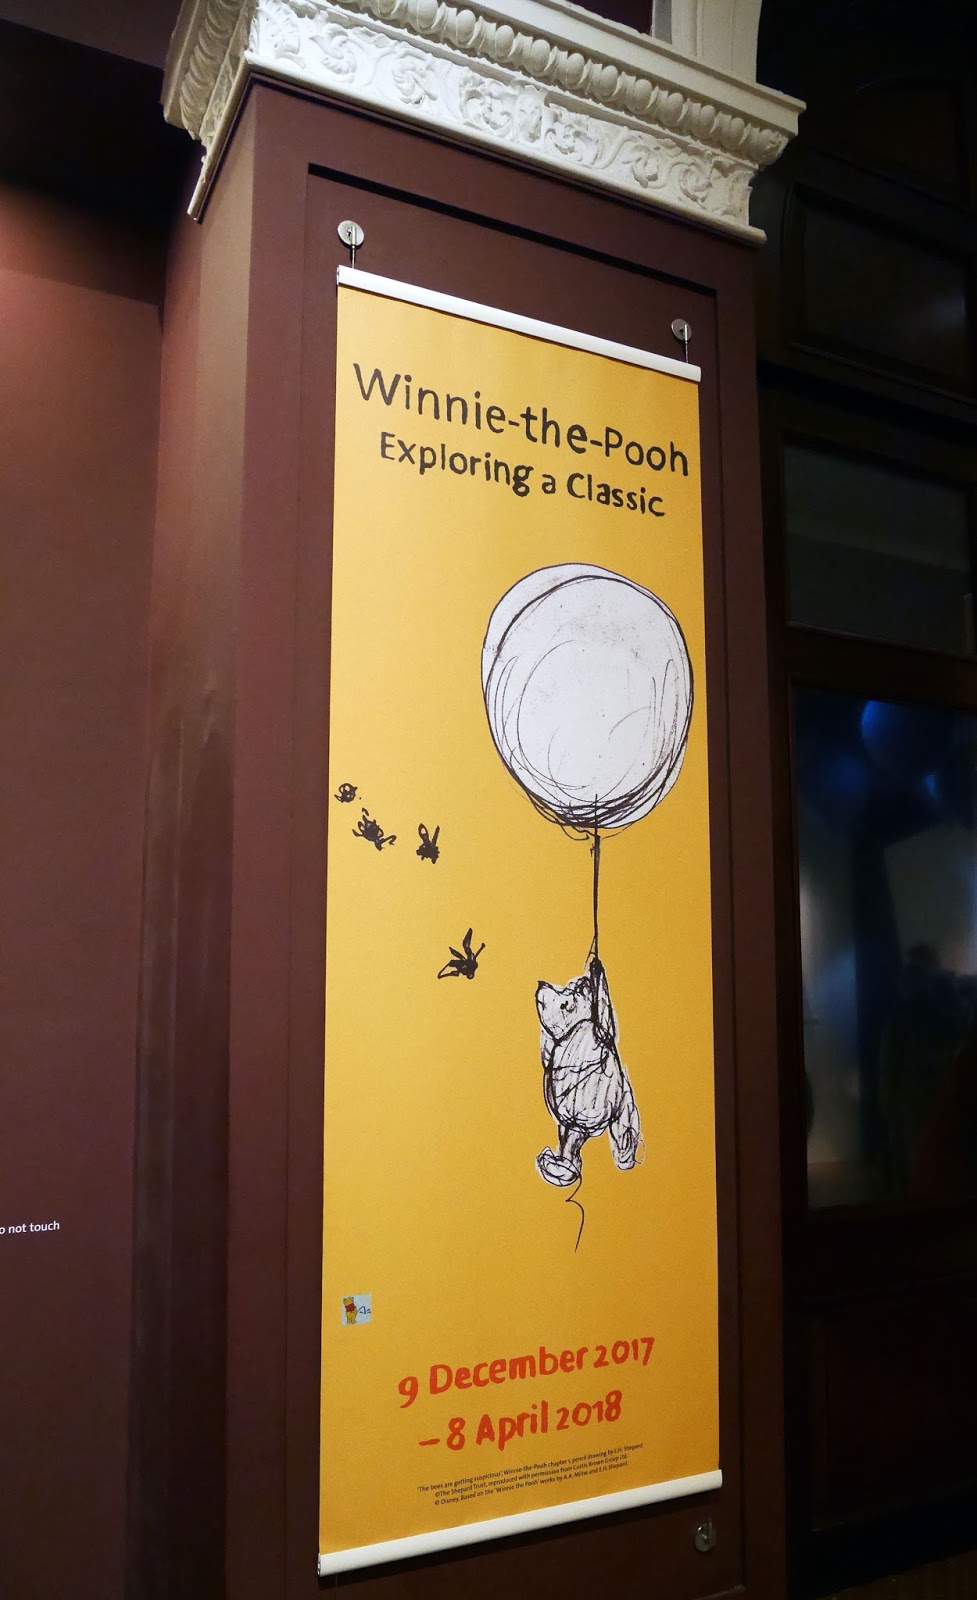 Winnie the Pooh: Exploring a Classic exhibition at the Victoria and Albert Museum, London